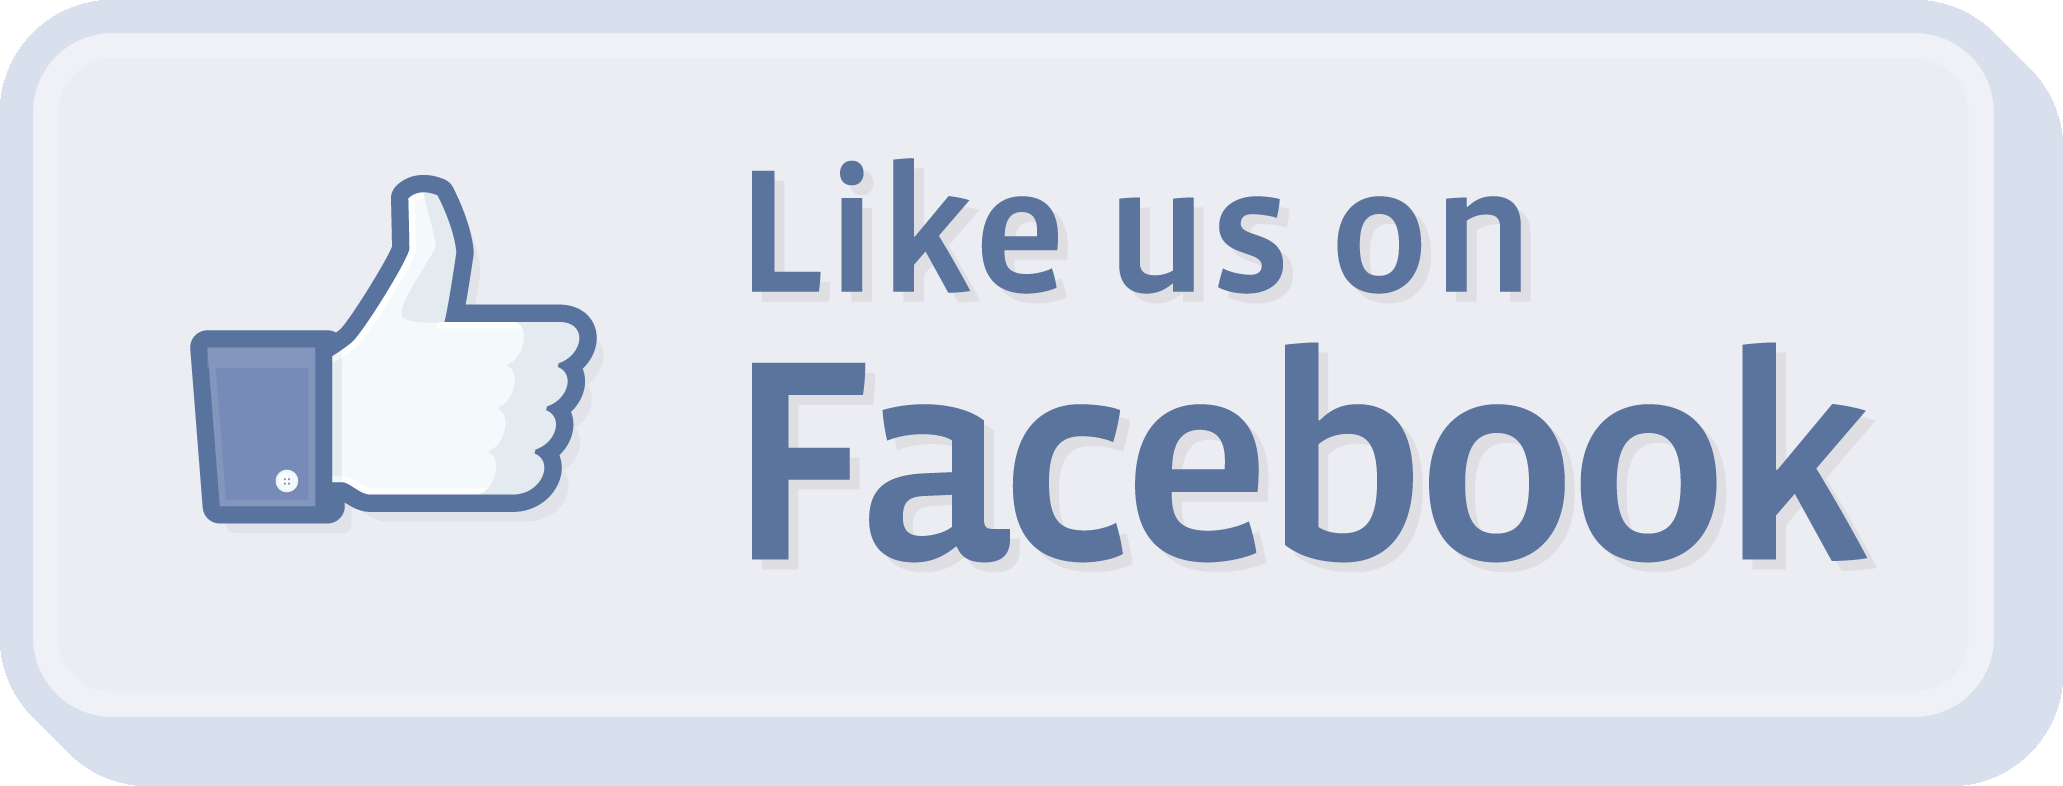 FB Like Logo - Facebook Logo Transparent PNG Pictures - Free Icons and PNG Backgrounds